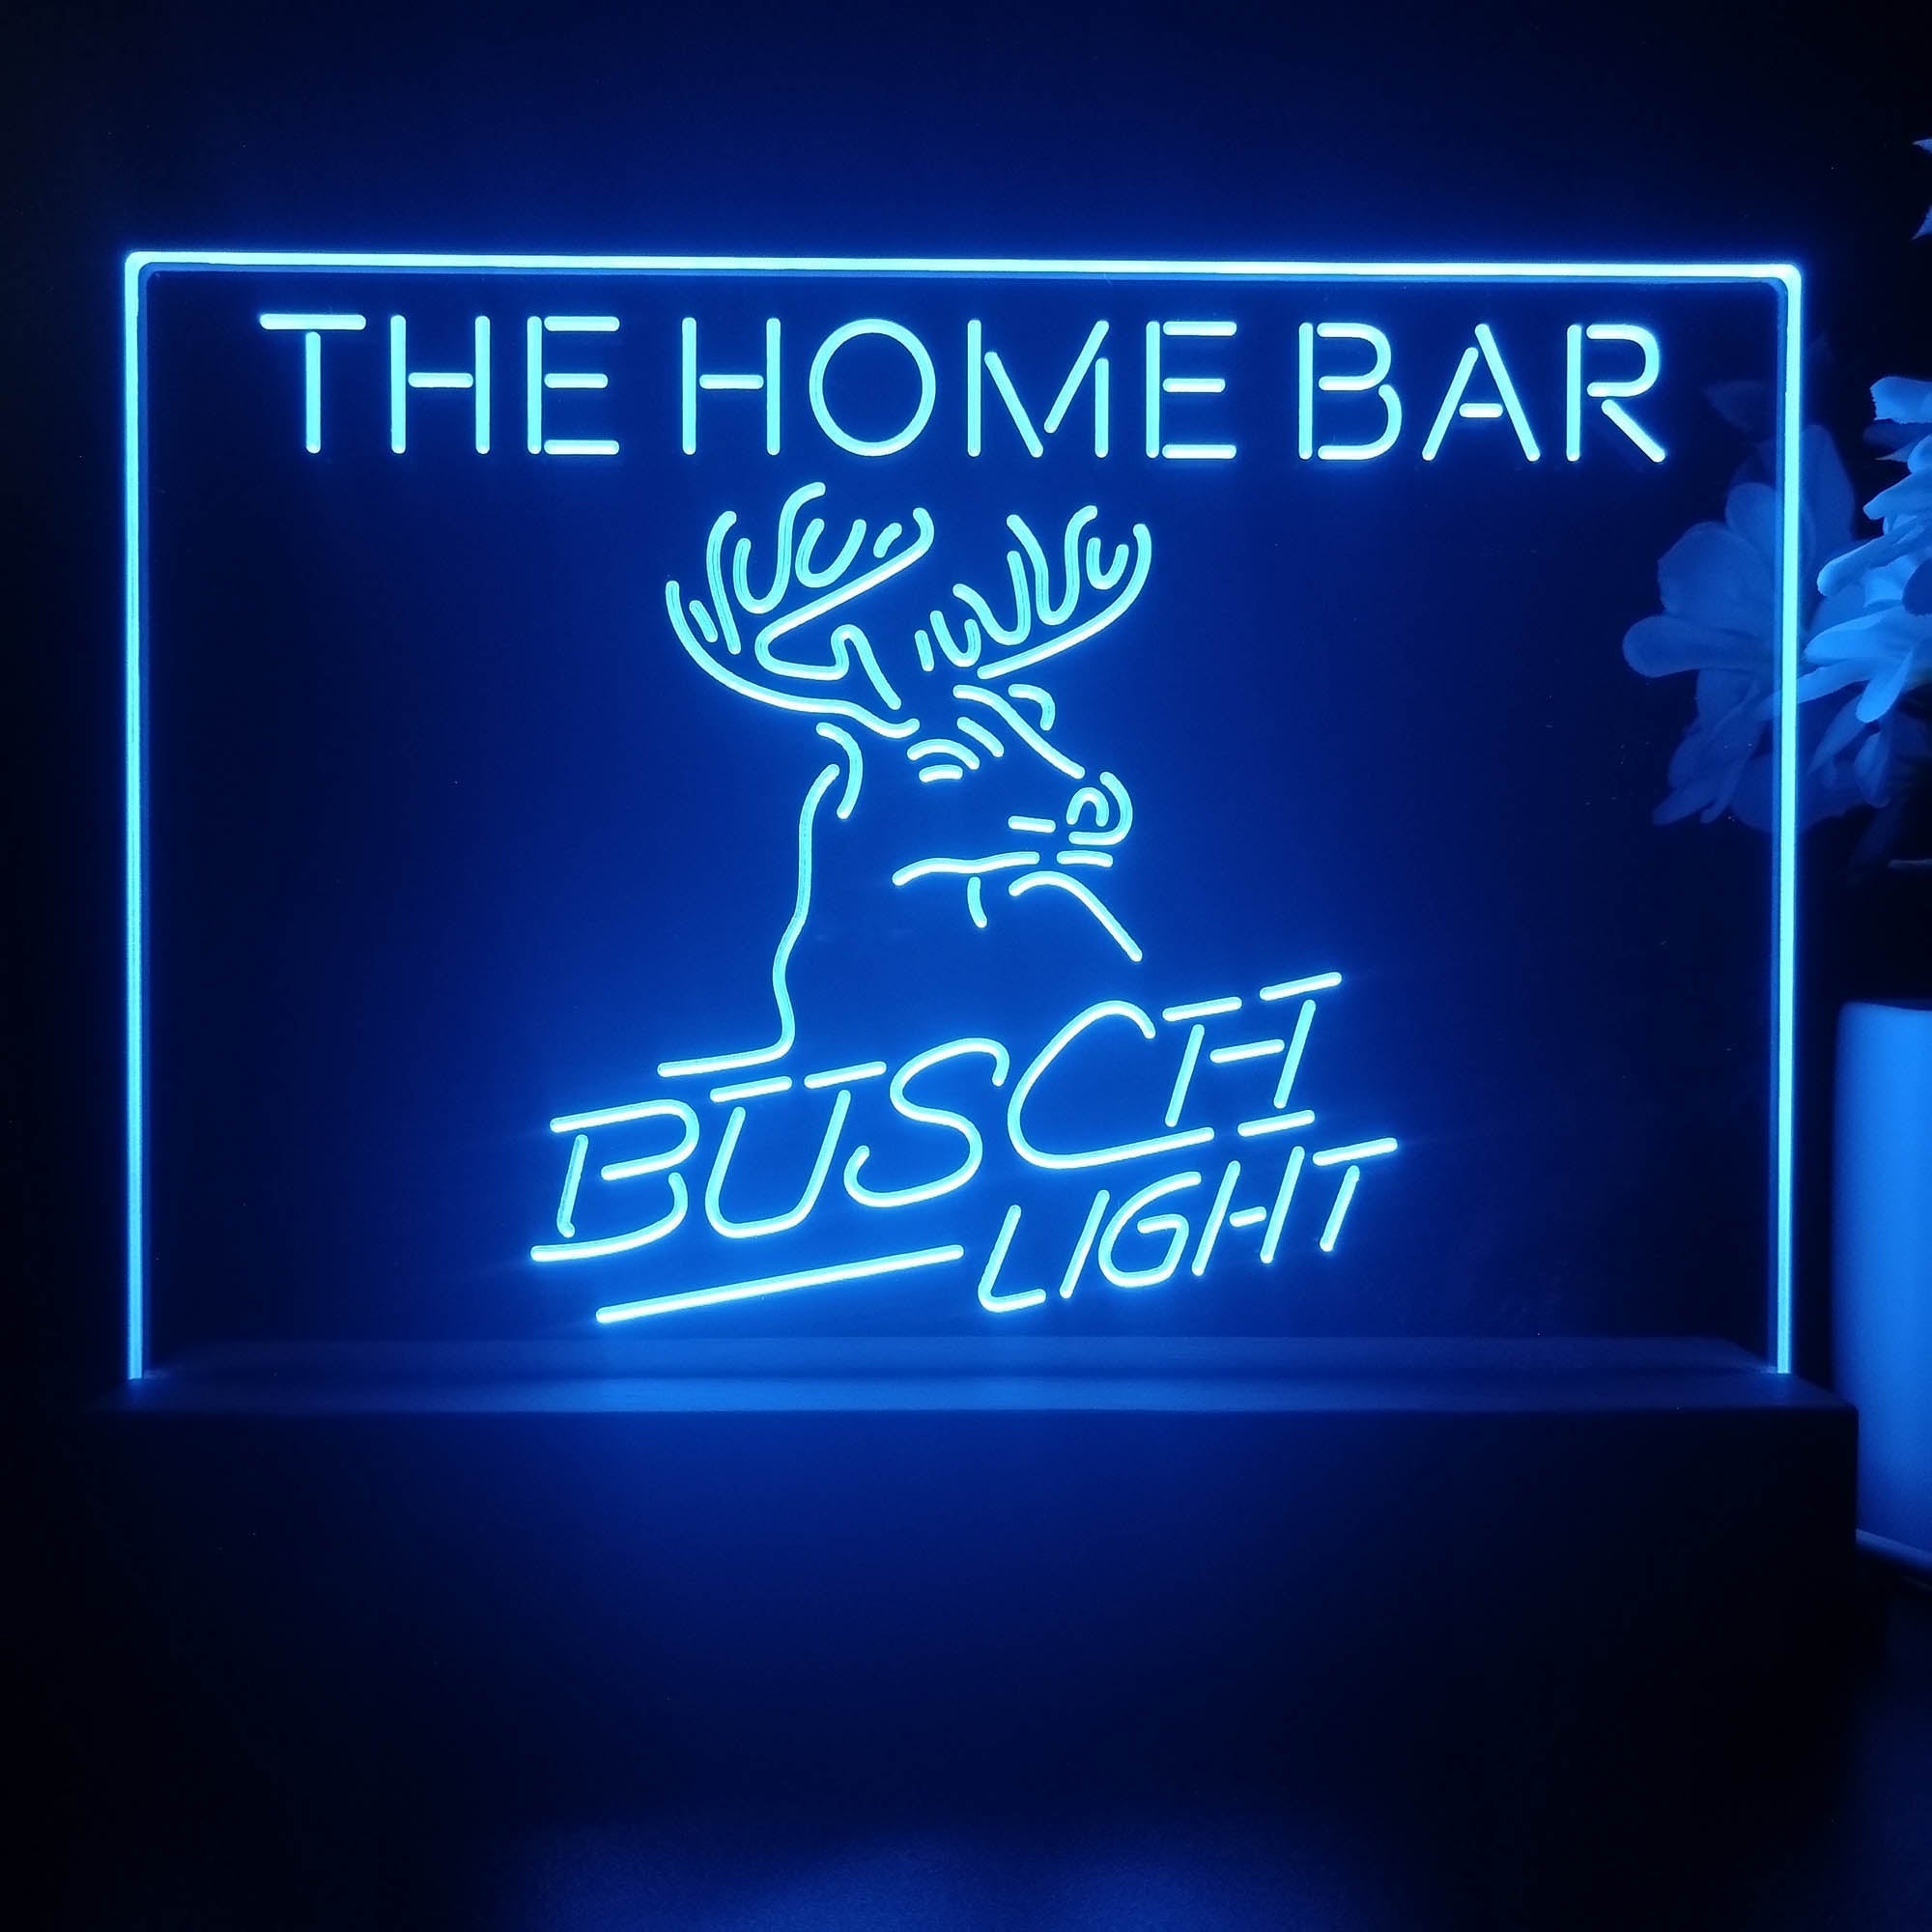 Personalized Busch Souvenir Neon LED Night Light Sign